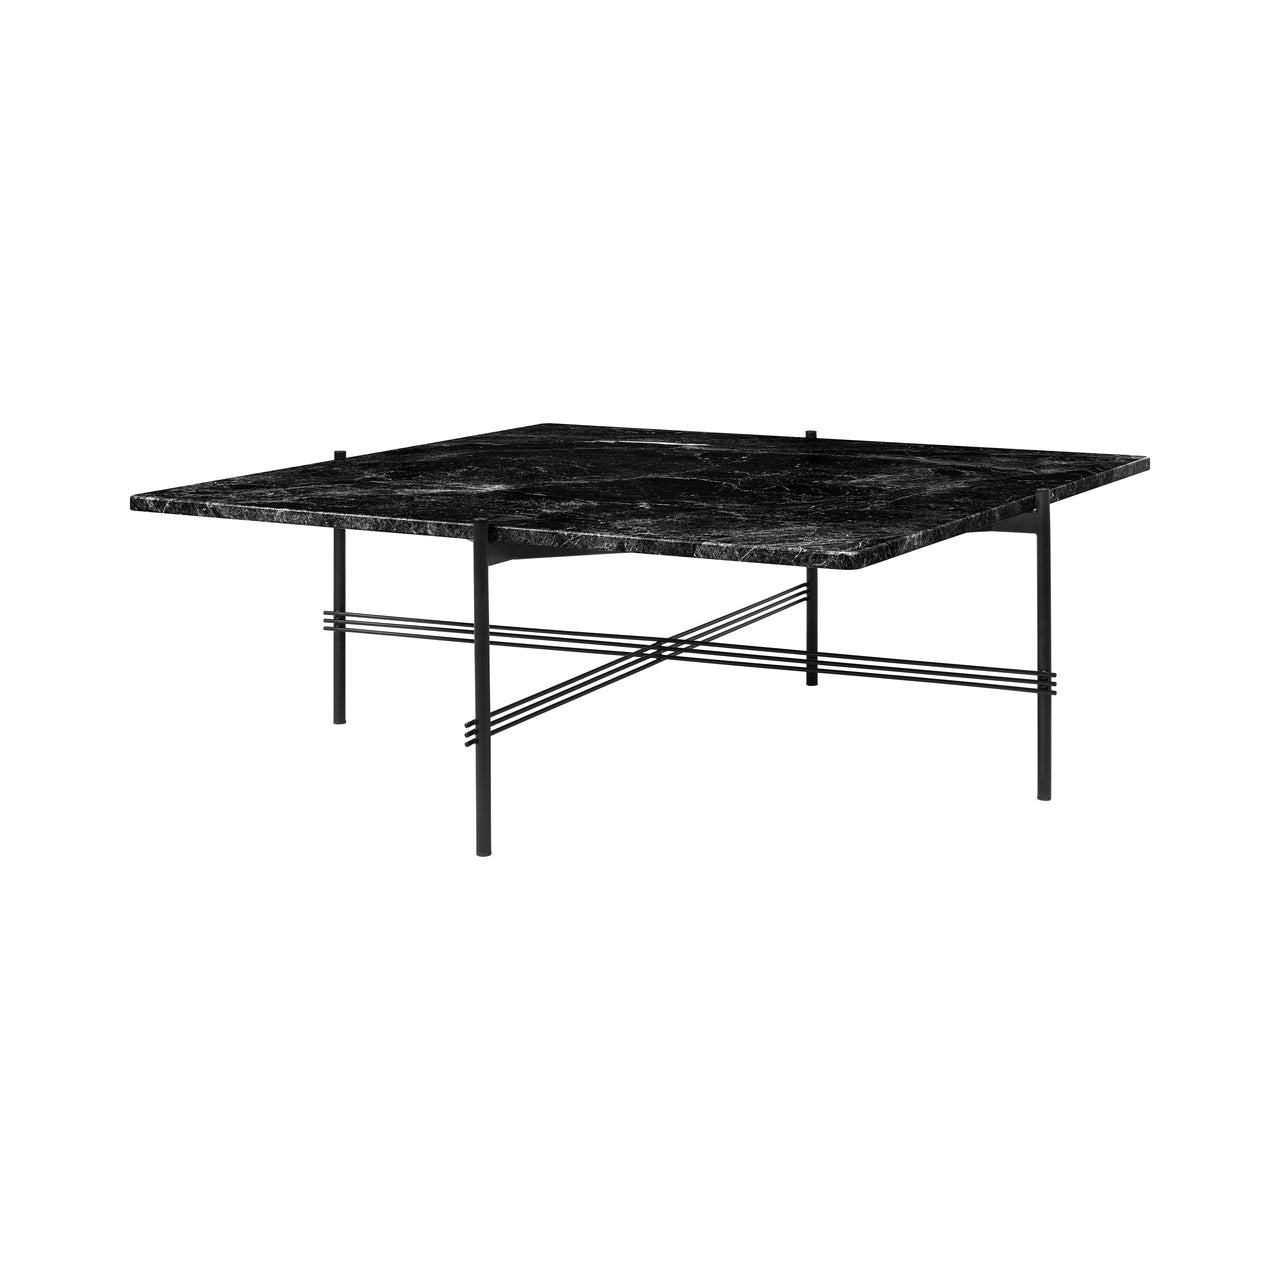 TS Square Coffee Table: Large - 41.3